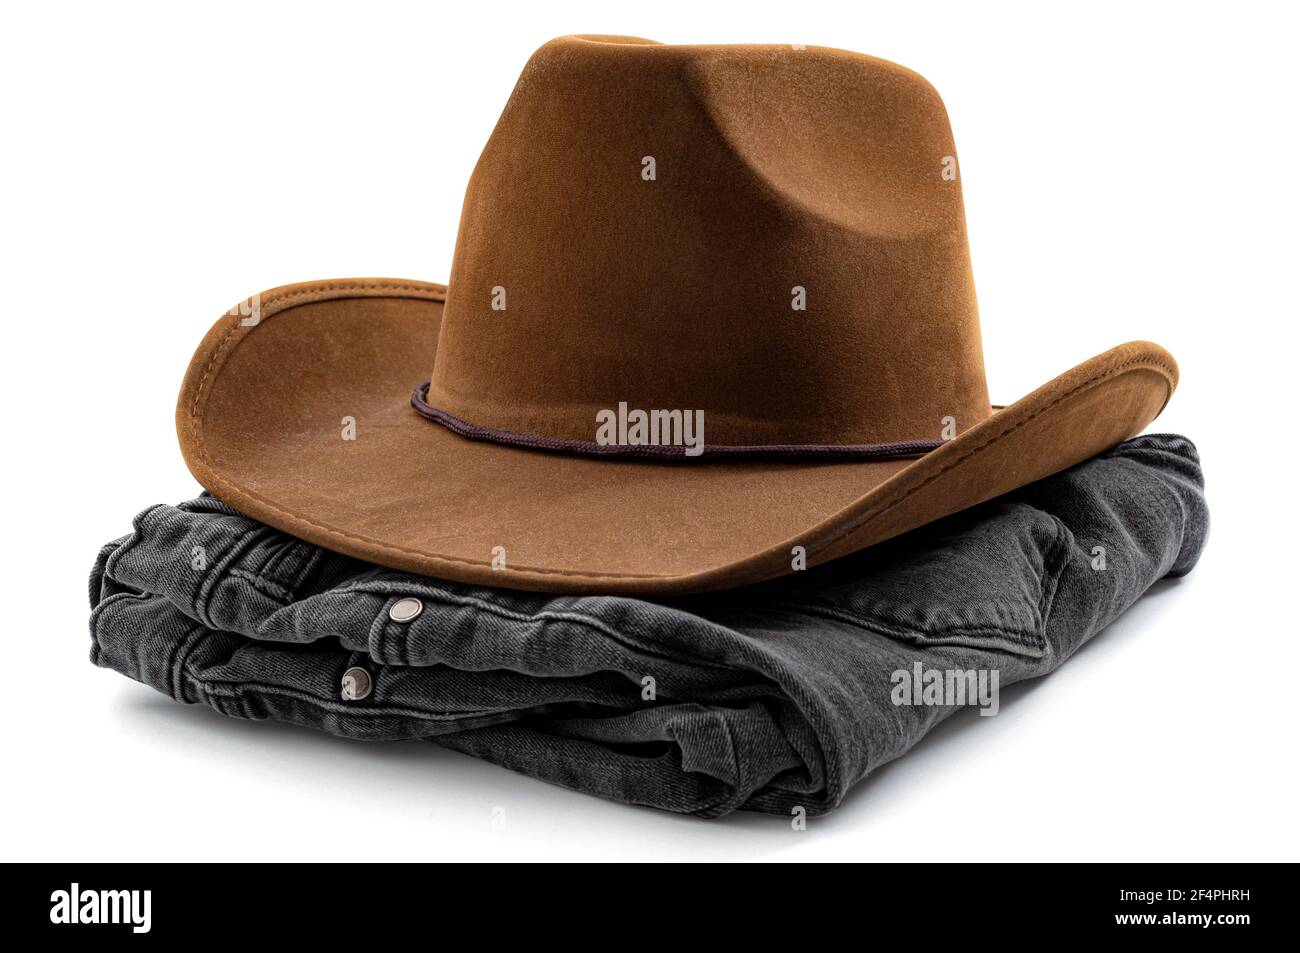 American cowboy wear, western design and country fashion conceptual idea with folded pair of black denim jeans and brown cowboy hat isolated on white Stock Photo